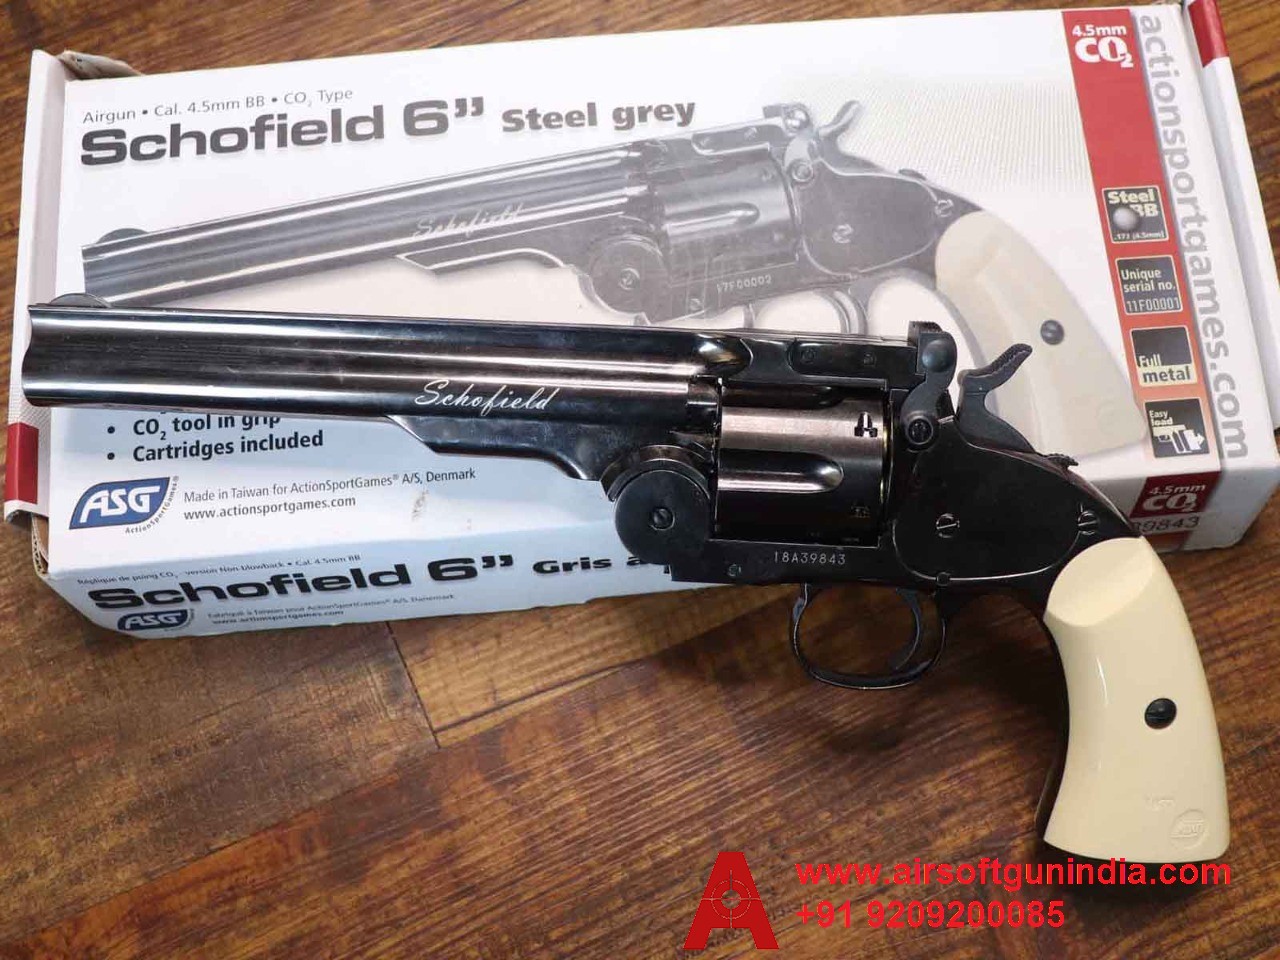 Schofield 6-inch Steel Gray Co2 BB .177Cal, 4.5mm Co2 BB Air Revolver By Airsoft Gun India